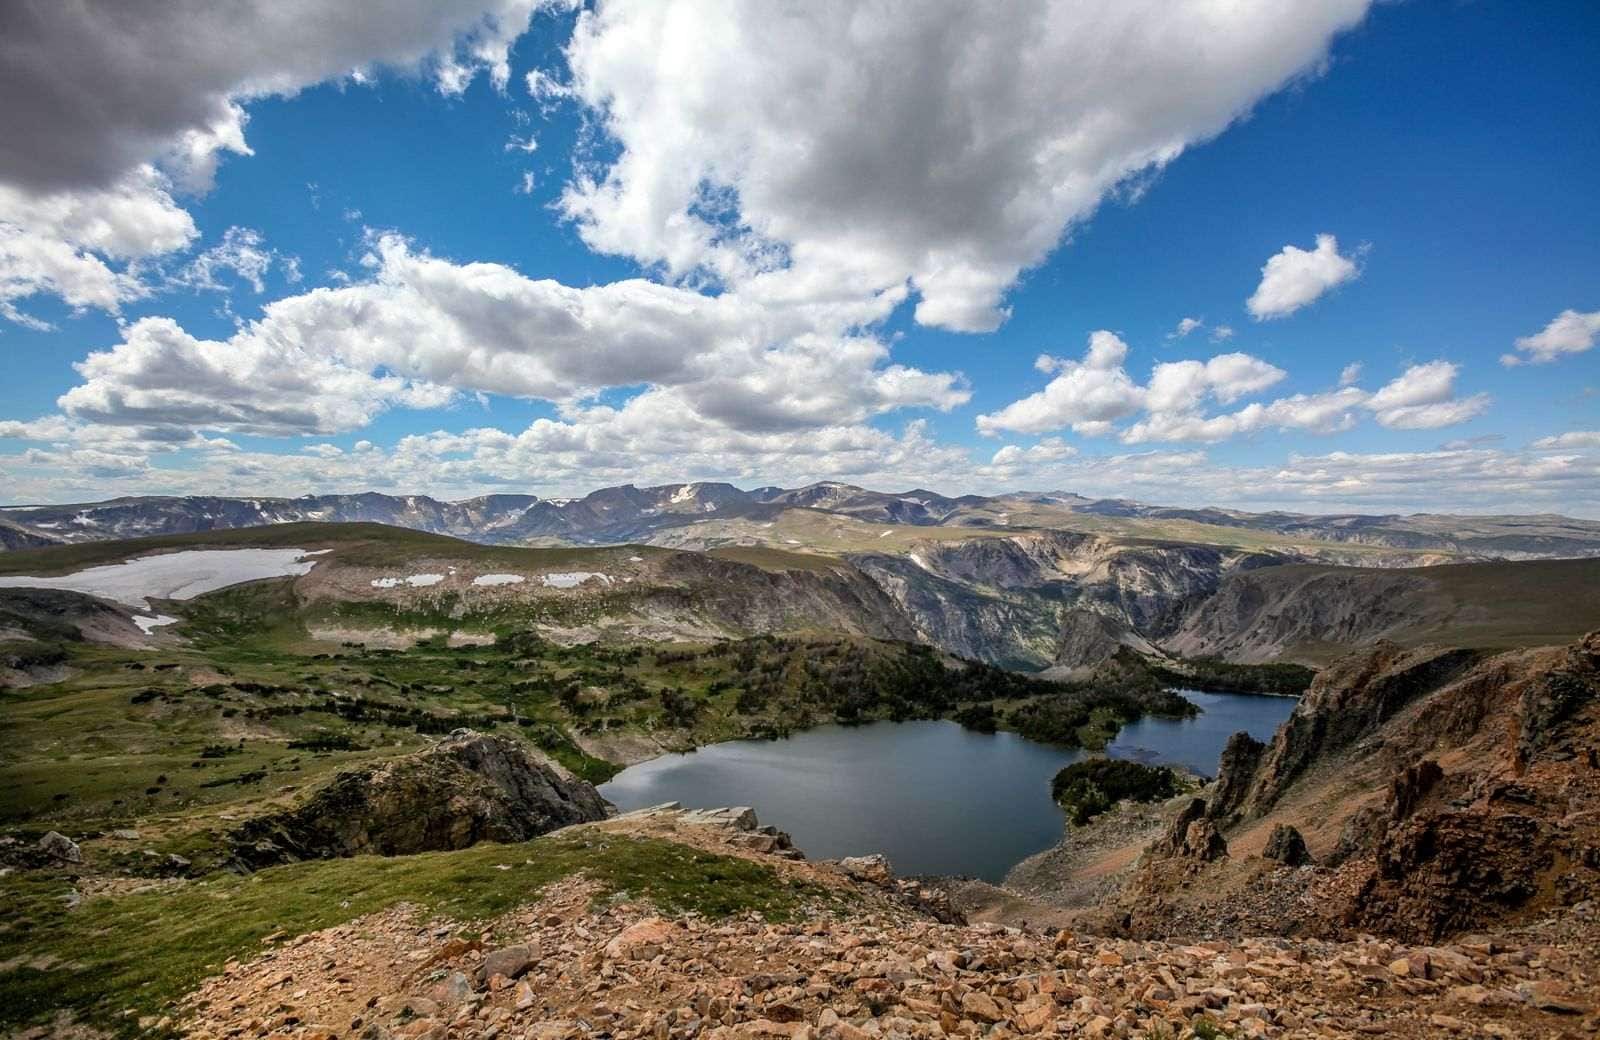 You won't be disappointed by the Beartooth area on your Montana road trip!